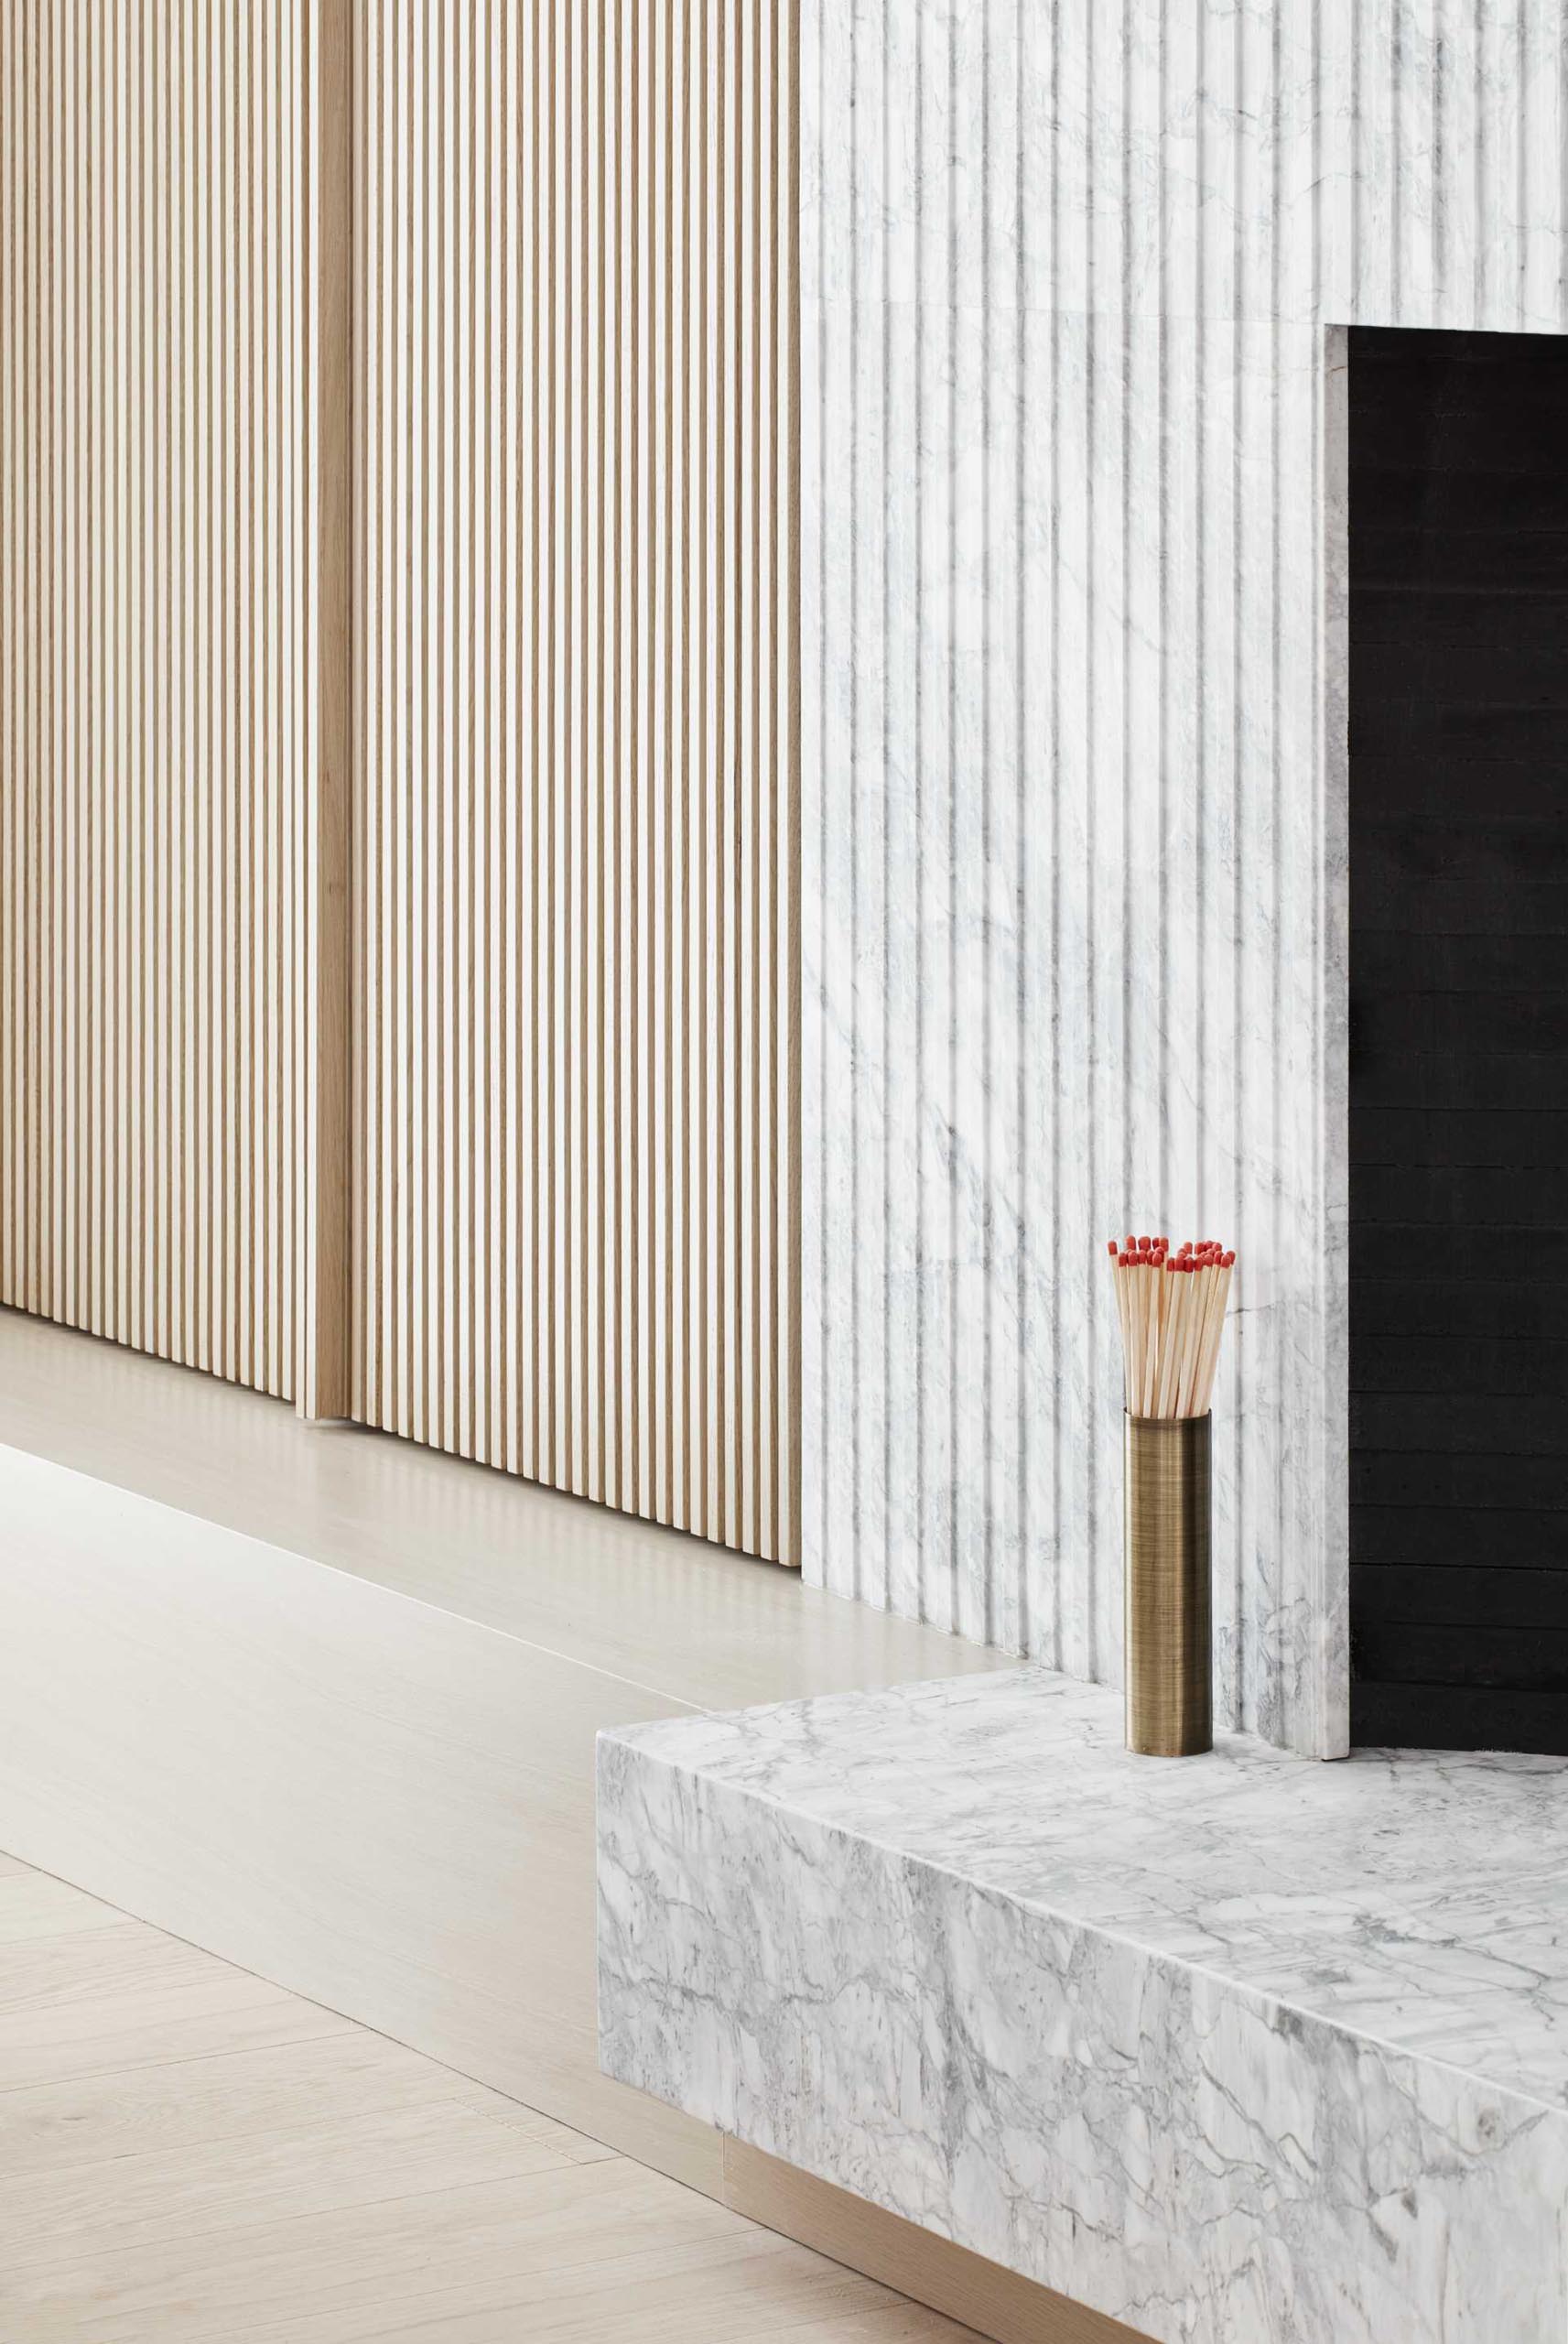 Next to this grey quartz fireplace surround is a wood slat detail that hides a storage cabinet.